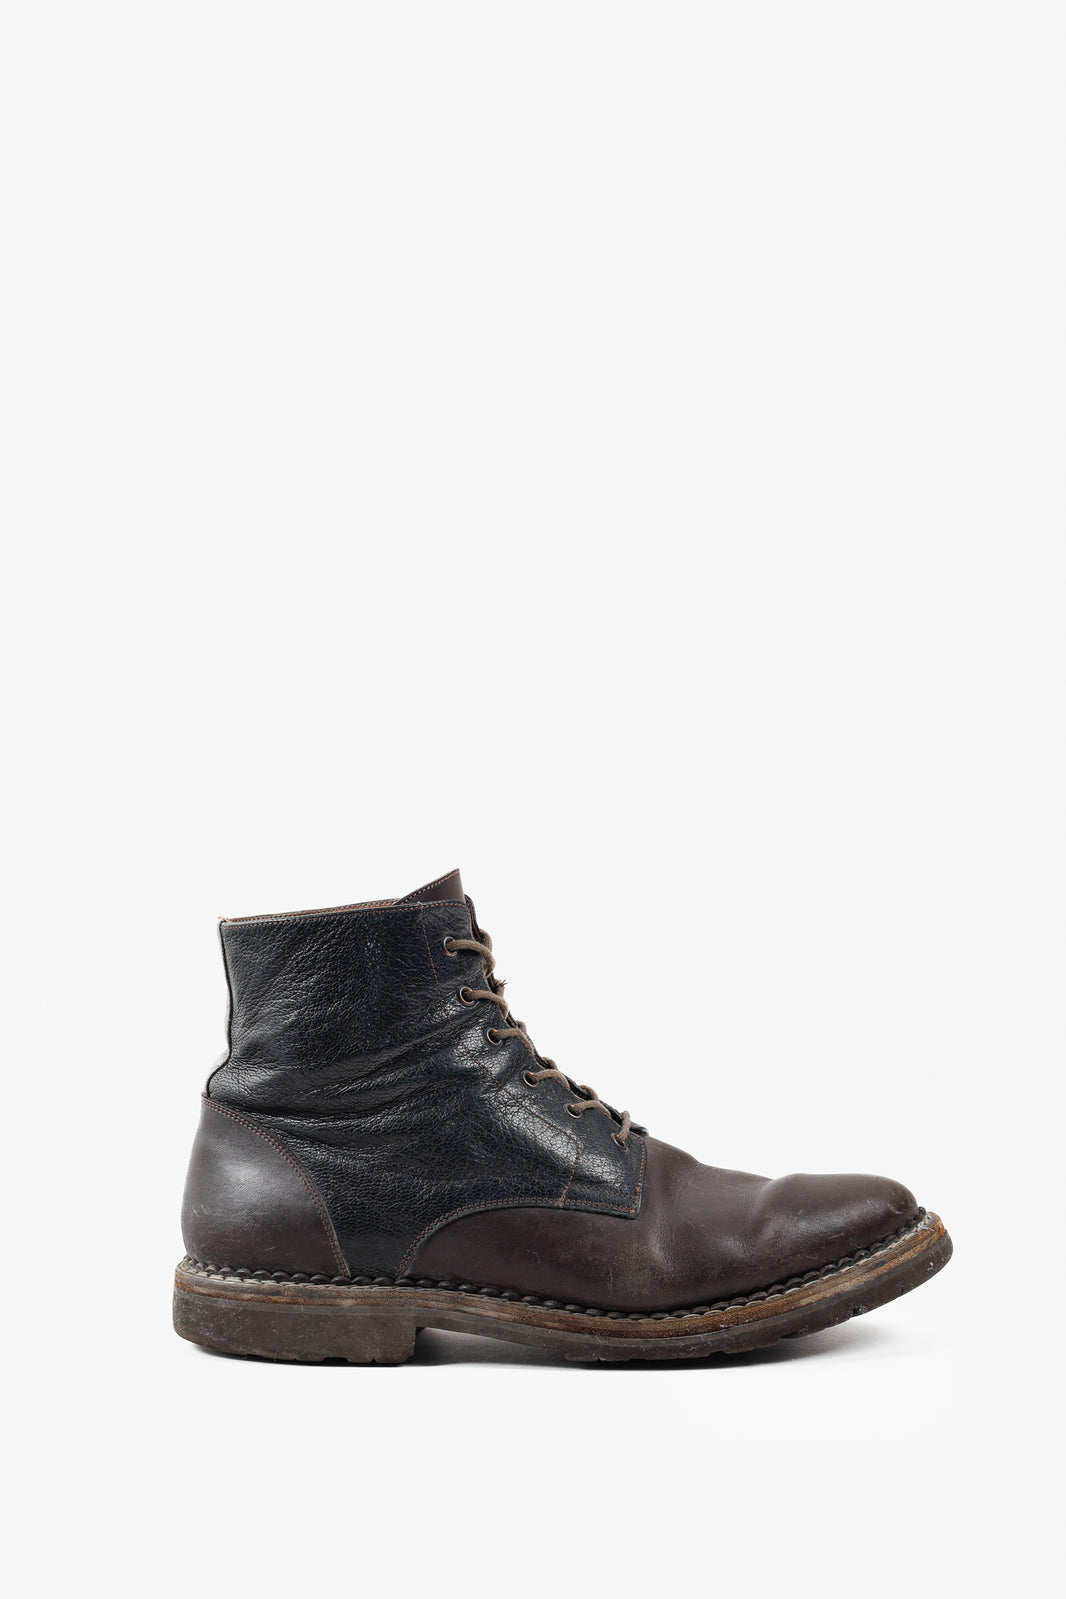 Brunello Cucinelli Two-Tone Leather Lace-Up Boots